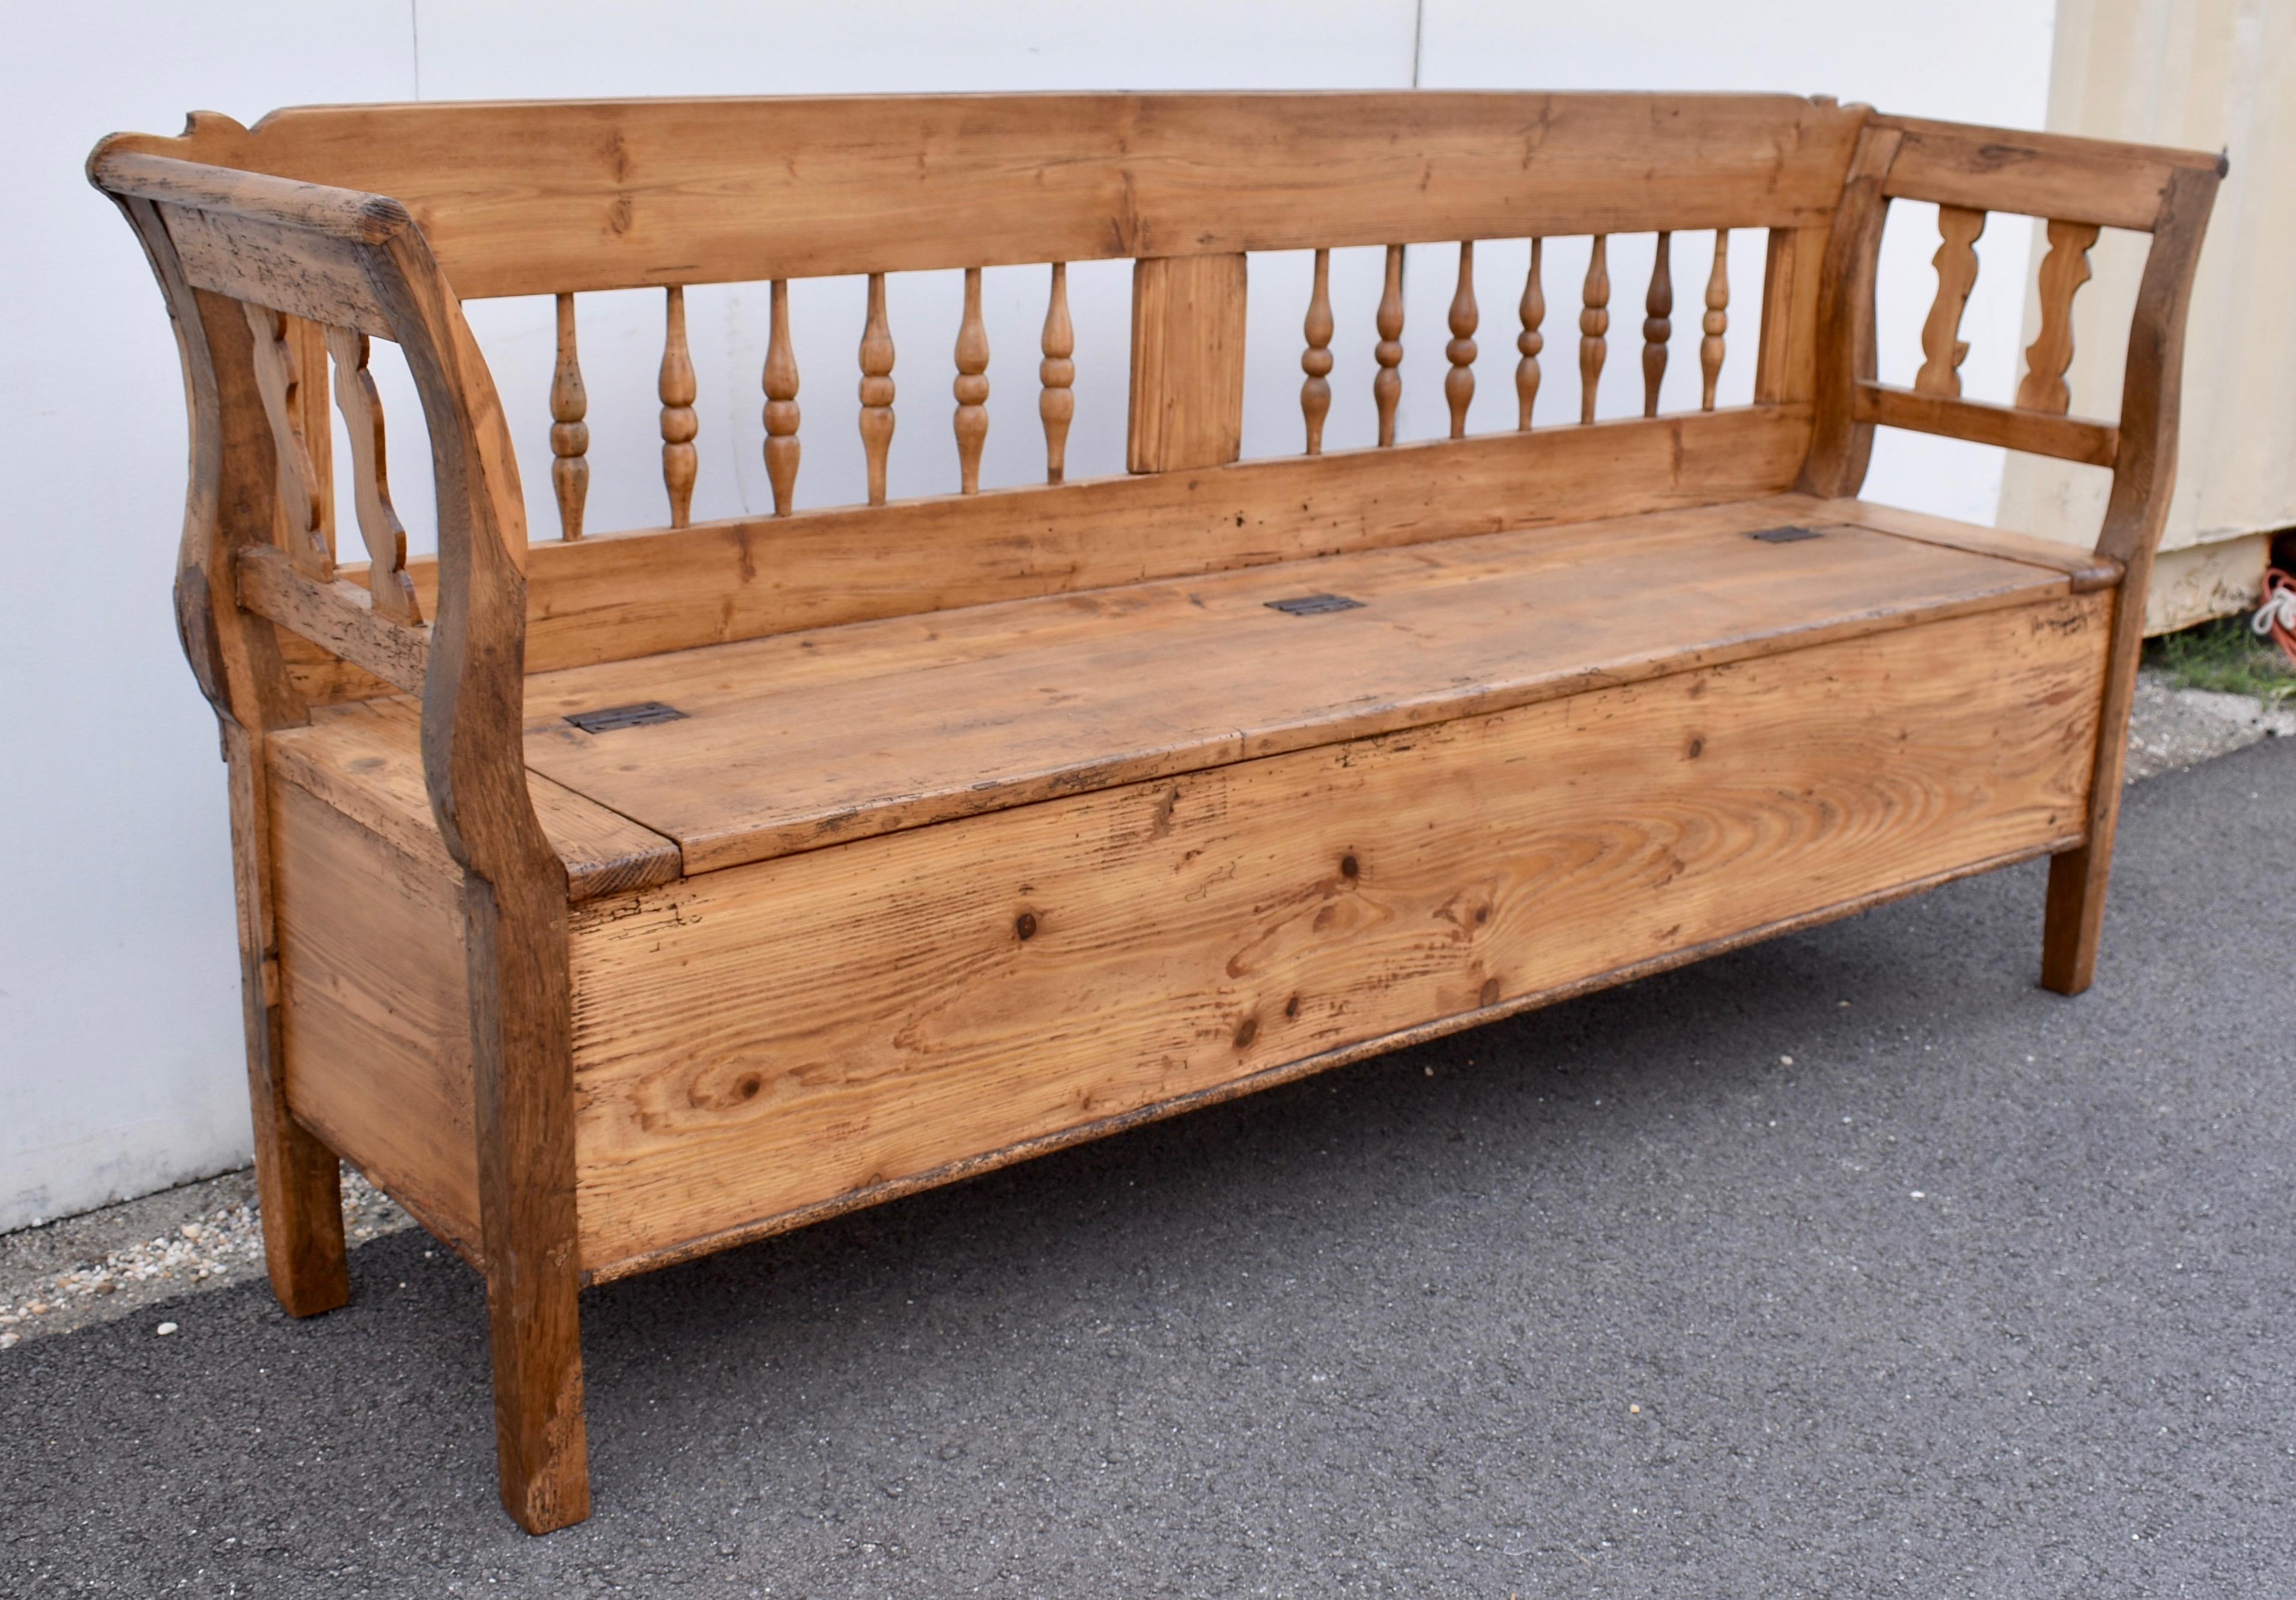 This long storage bench has a few details that set it apart from many of the rest.  Its size is impressive and so is its form.  The otherwise flat back top rail has a little “flick” at each end that emphasizes the scroll at the top of the arms.  A